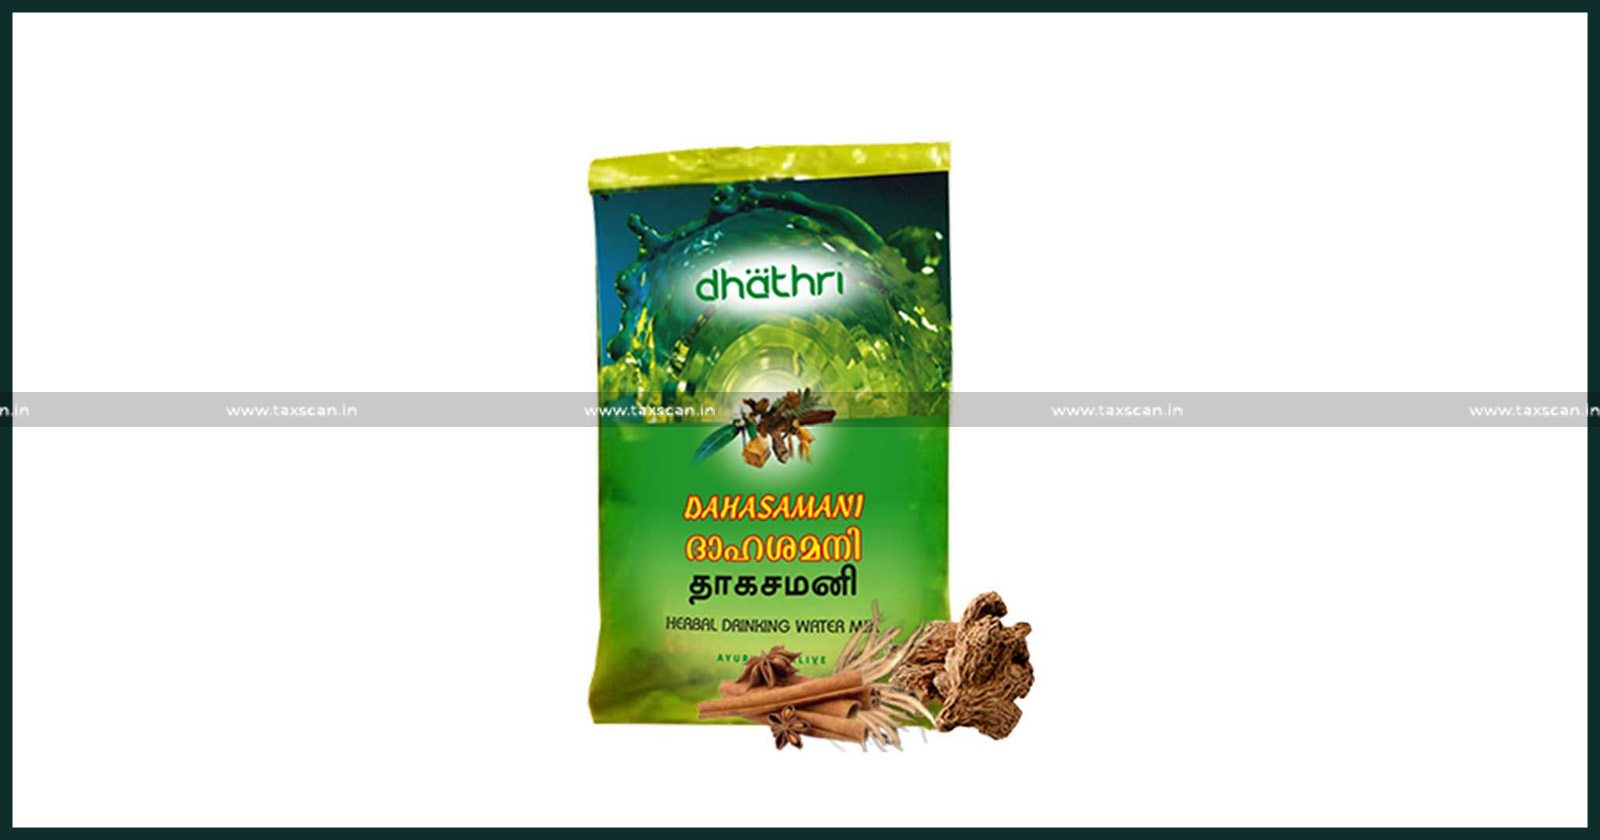 Dhathri Ayurveda’s - Dhathri Dahasamani - Mixed Condiments and Mixed Seasonings - Mixed Condiments - Mixed Seasonings - GST Applicable - GST - AAR - Authority for Advance Ruling - taxscan